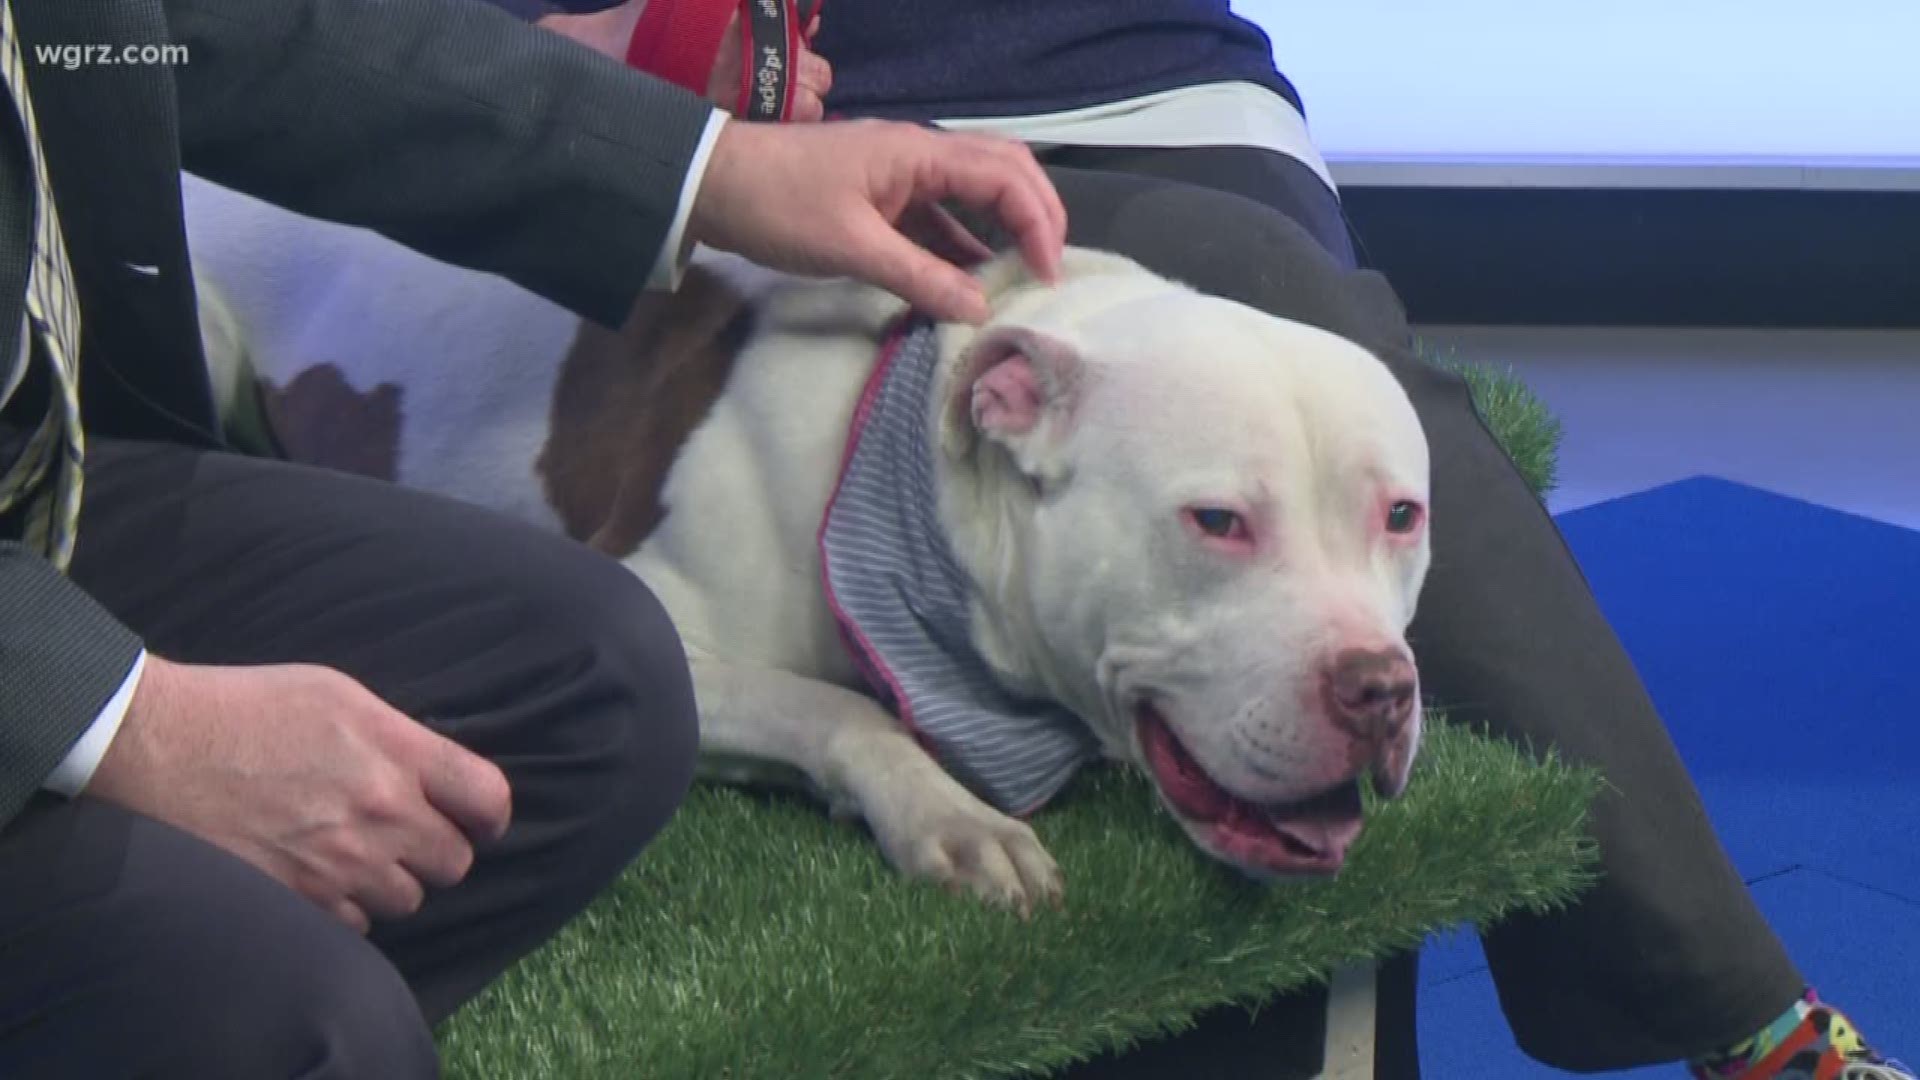 Scooter is about 2 years old, and he's up for adoption from the Buffalo Animal Shelter.